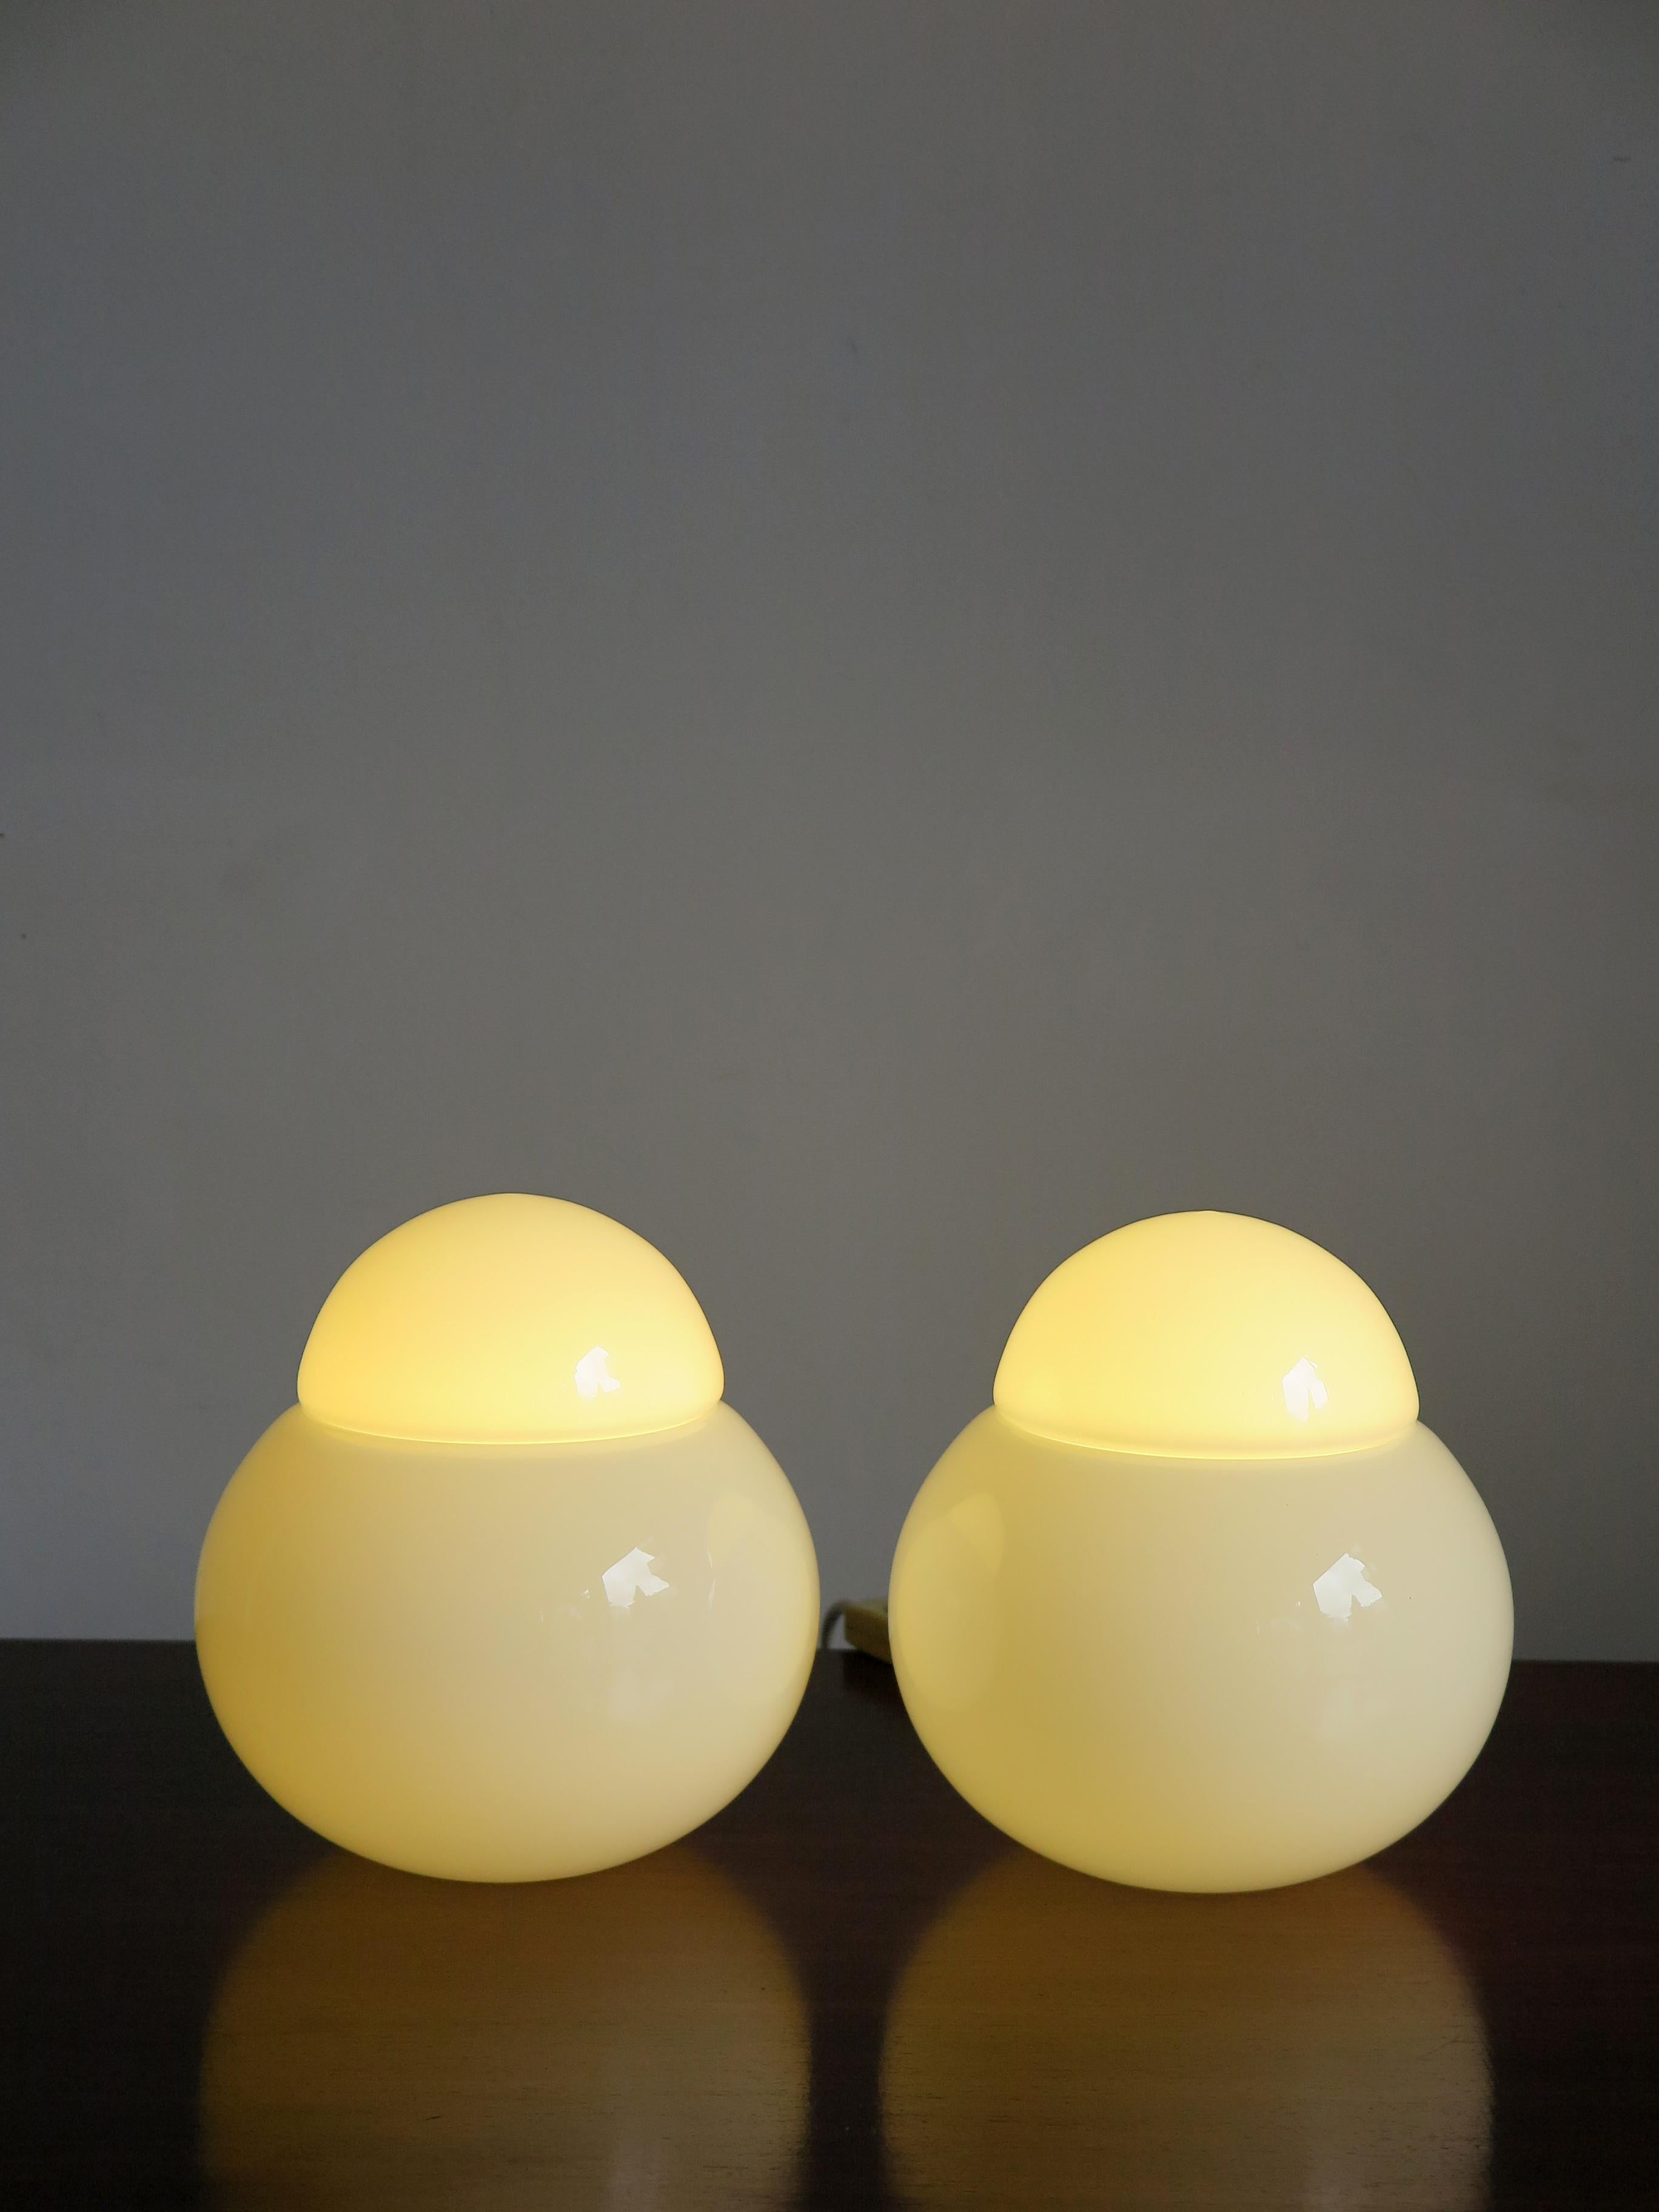 Set of two Italian Mid-Century Modern design lamps for side table model Daruma with two-component each in blown glass designed by Sergio Asti and produced by Candle from 1966.
Exhibited at the New Domestic Landscape